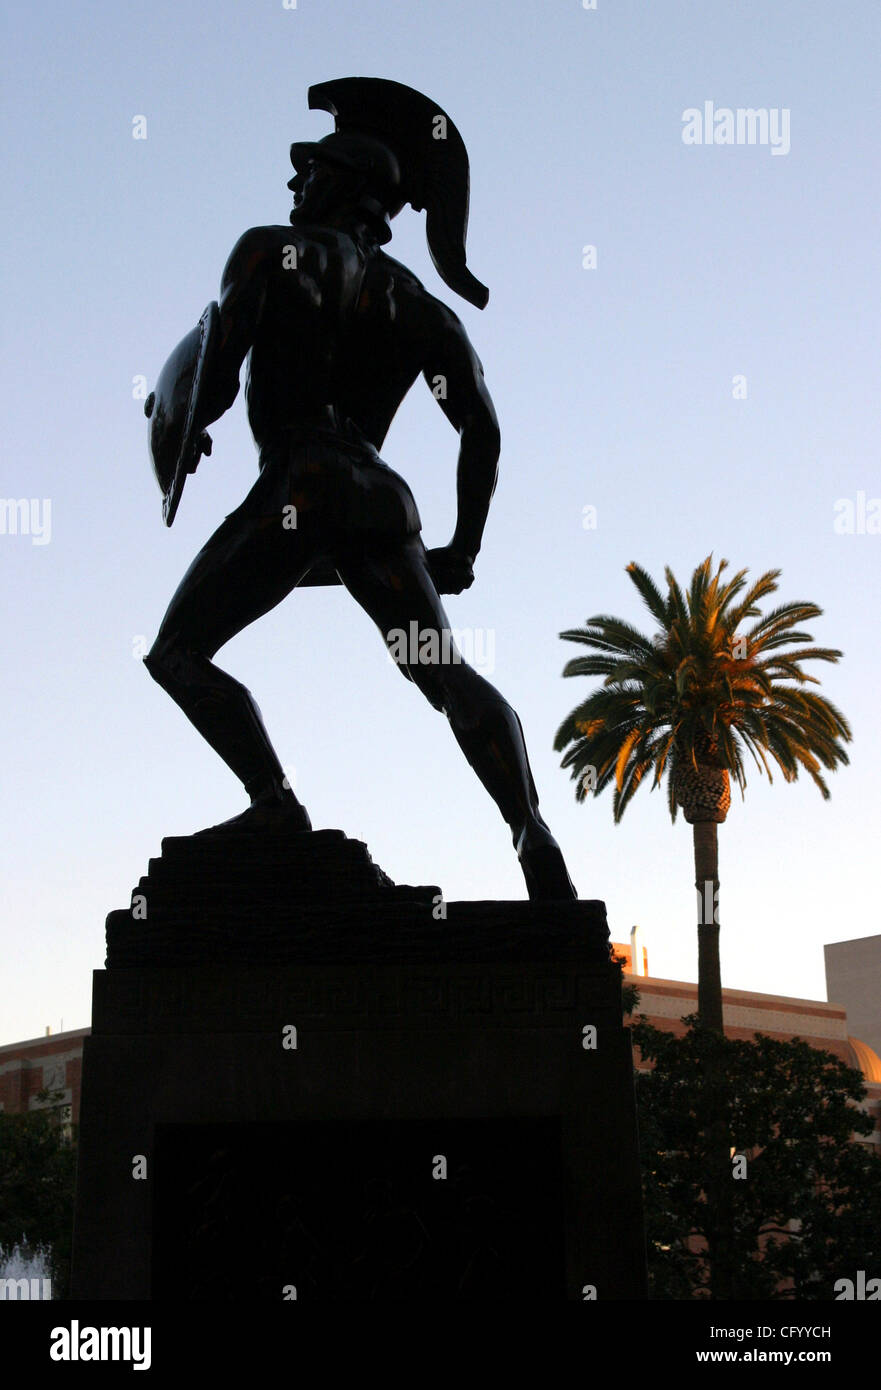 Jun 05, 2007 - Los Angeles, CA, USA - On the USC campus, the lifesize bronze statue in the middle of the  campus is Tommy Trojan, the University of Southern California collegiate symbol and a favorite meeting spot on campus since 1930. Credit Image: © Jonathan Alcorn/ZUMA Press. © Copyright 2007 by  Stock Photo